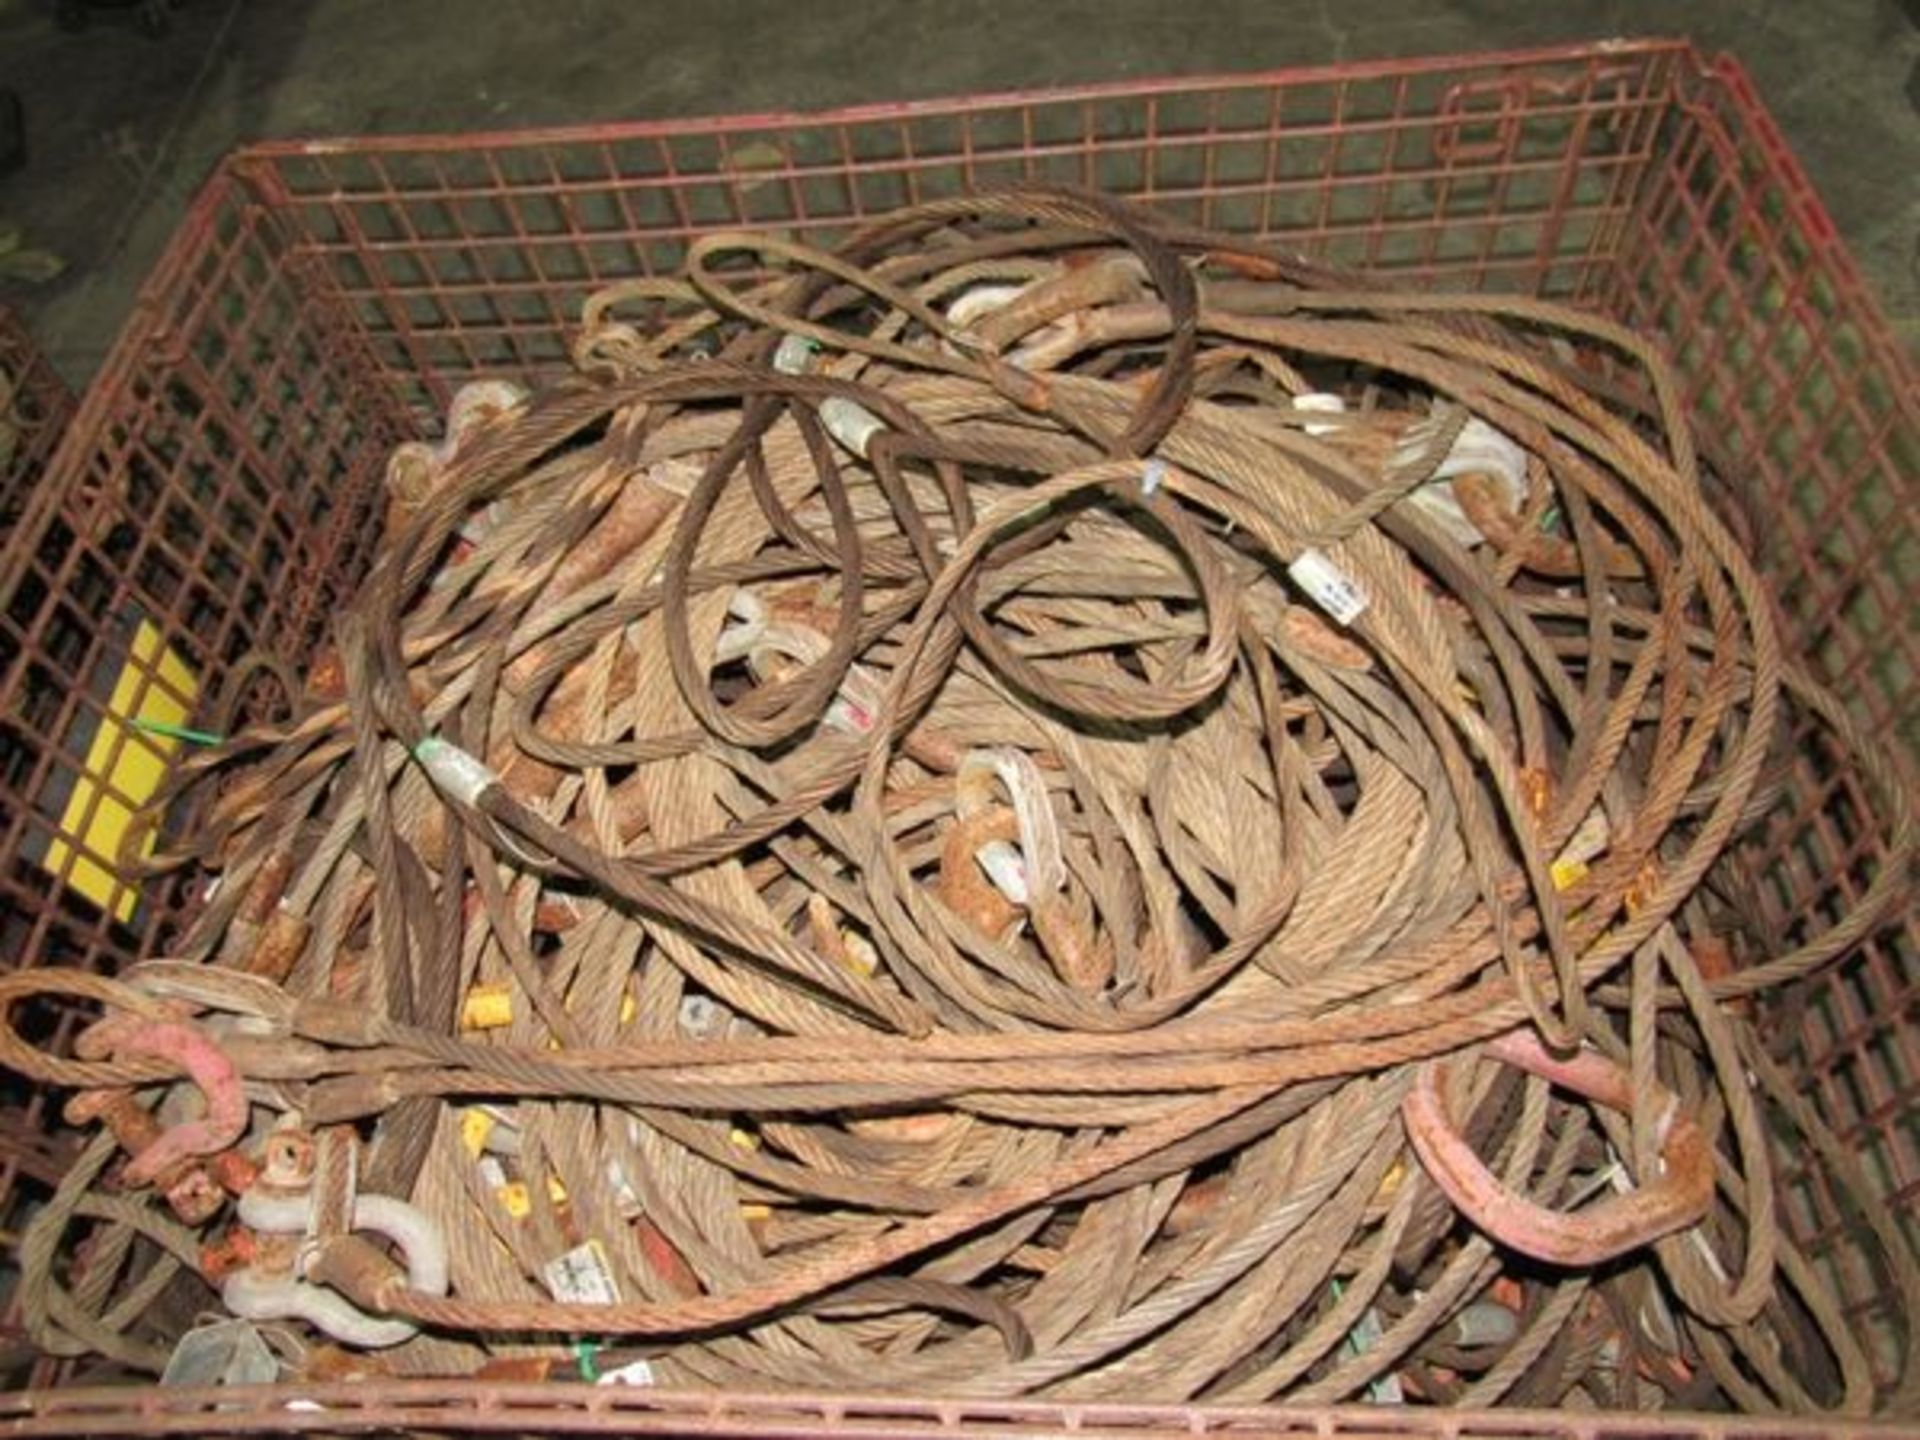 Assorted Braided Steel Lifting Slings and Spreader MFR - Dakota Riggers, QC21, Total Tool Sizes - Image 2 of 8